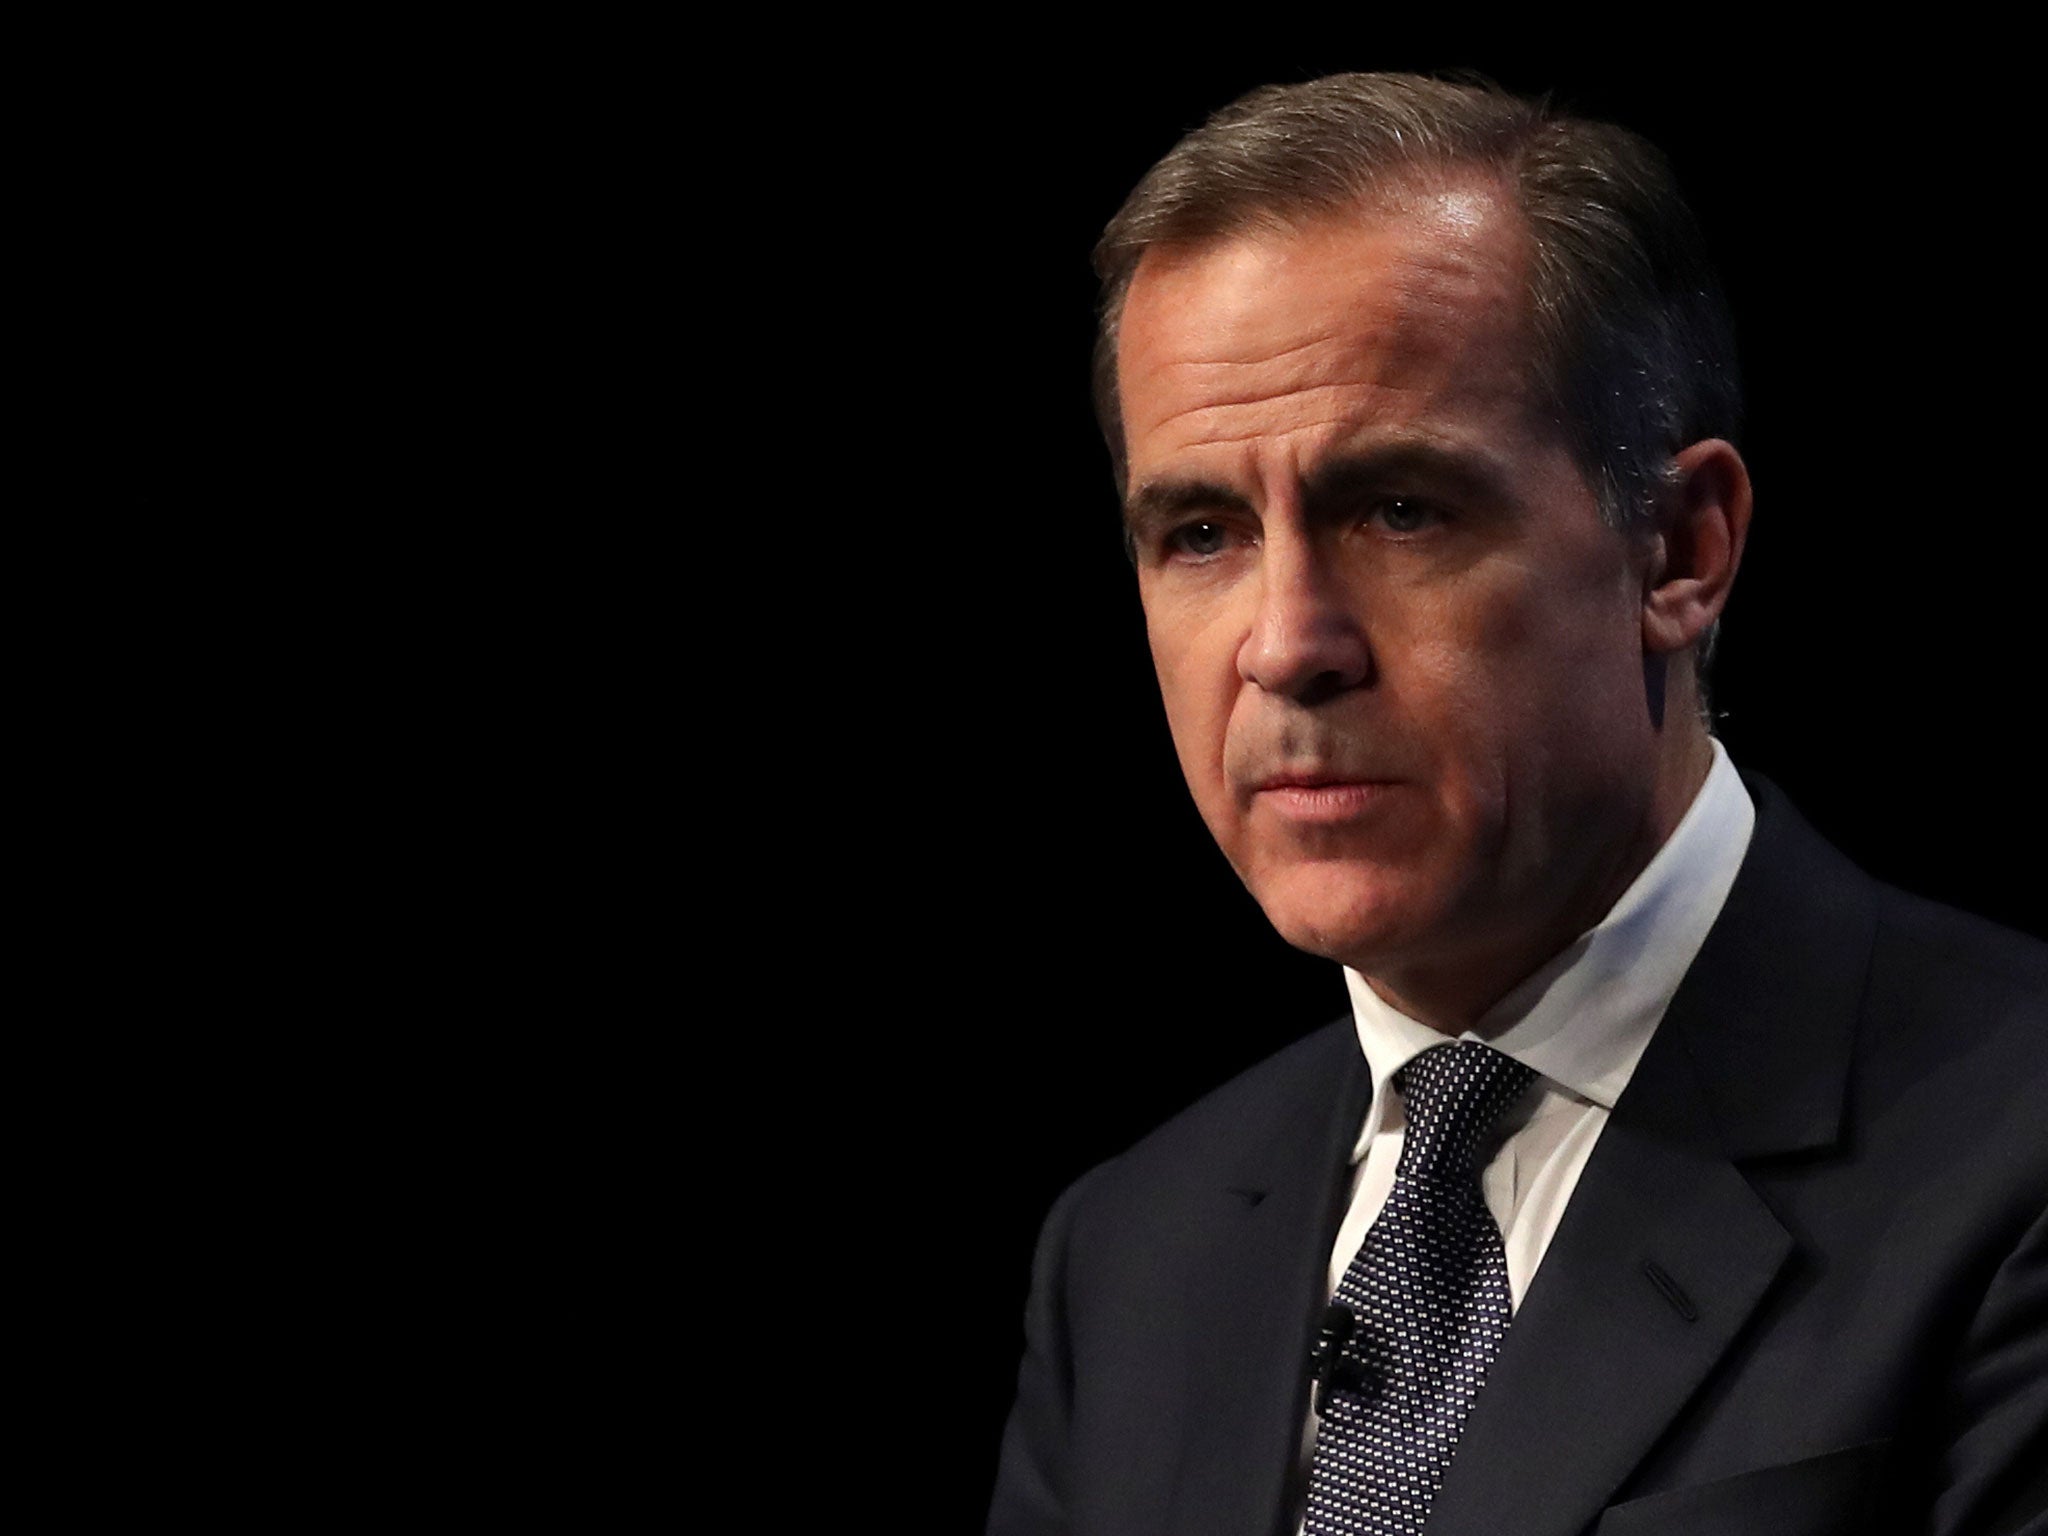 "Given our remit that would have been undesirable," said Mr Carney